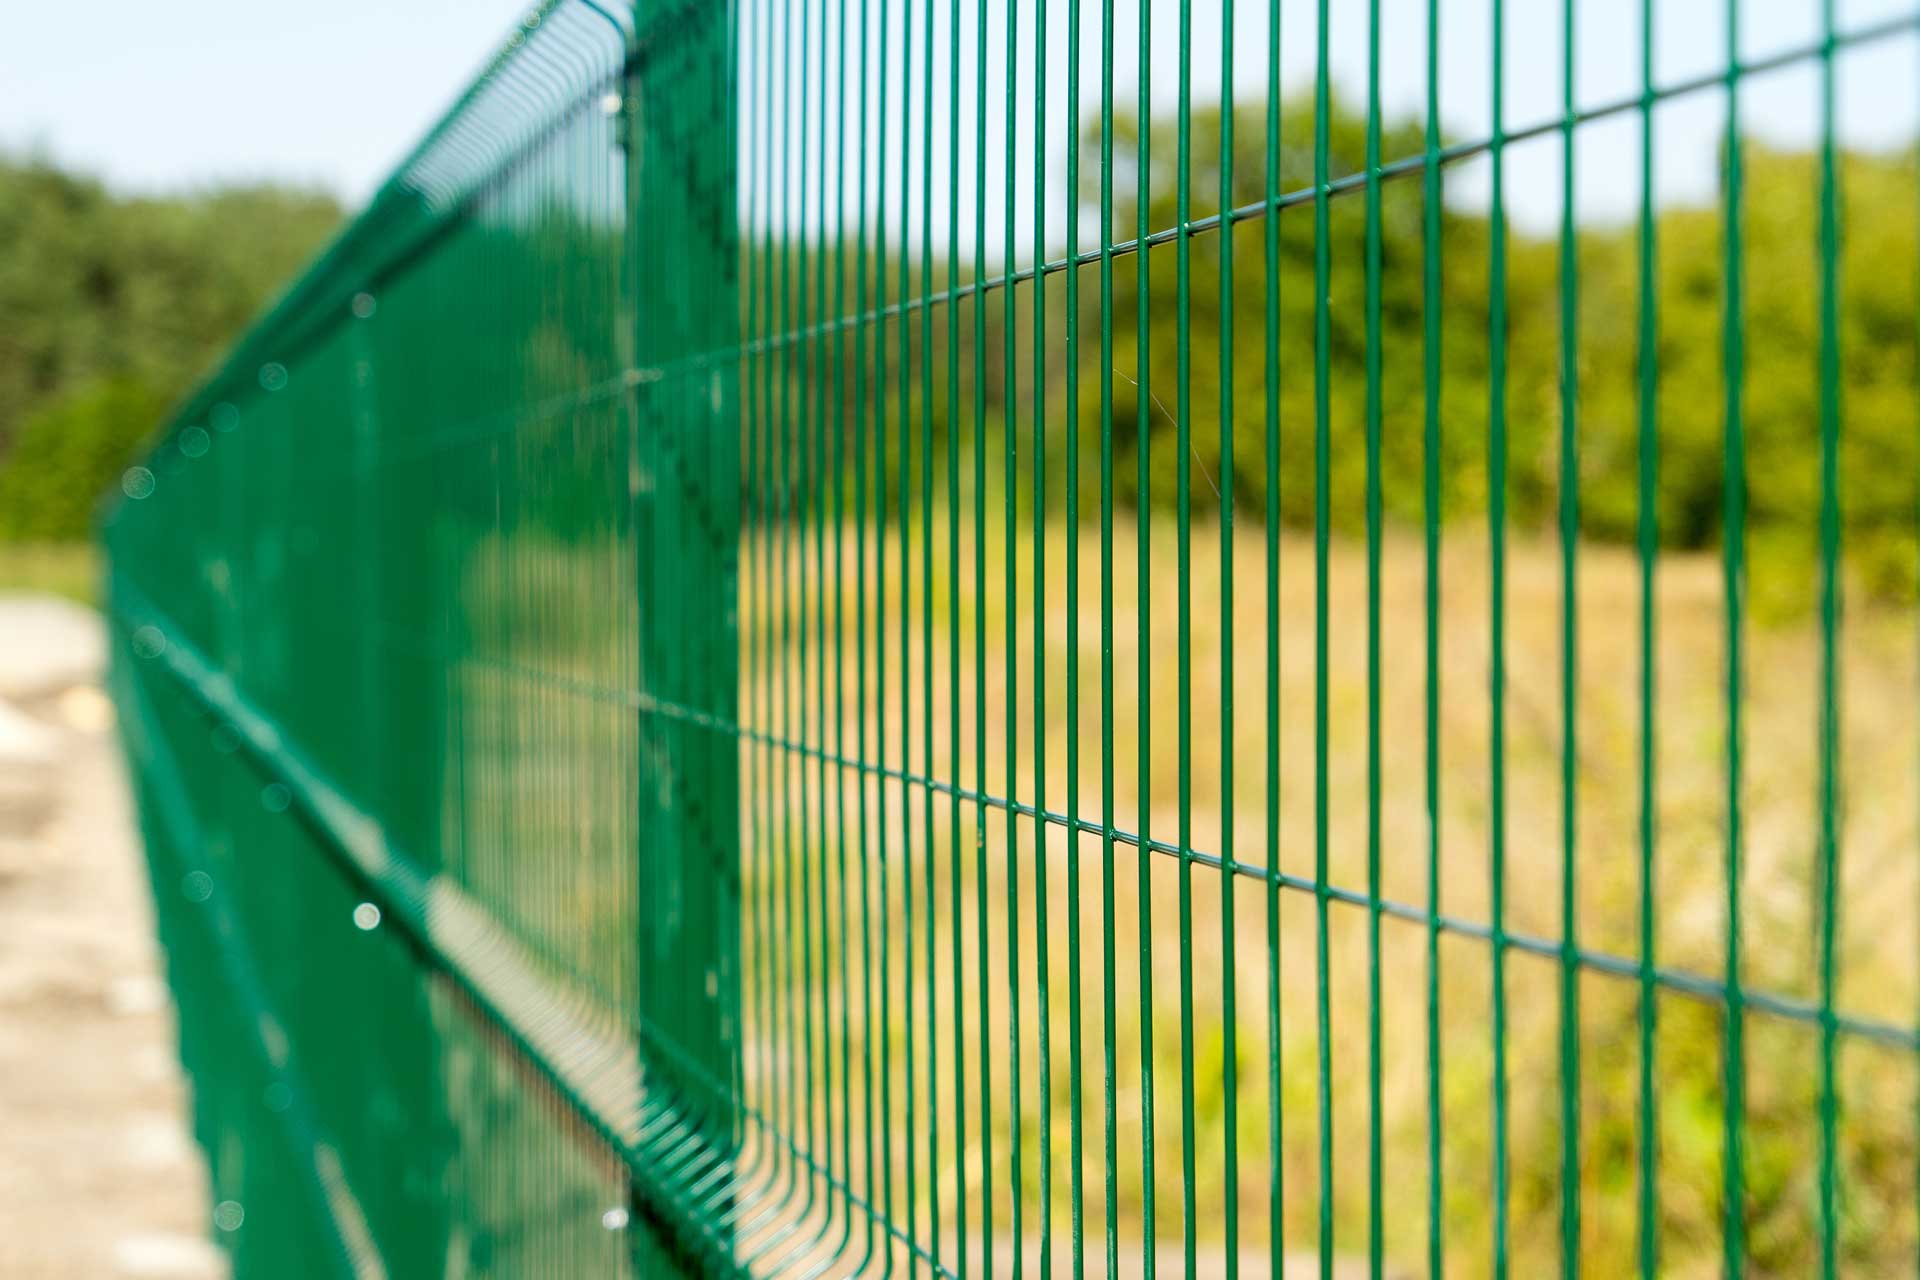 A green welded wire fence is shown up close with an open field in the background.